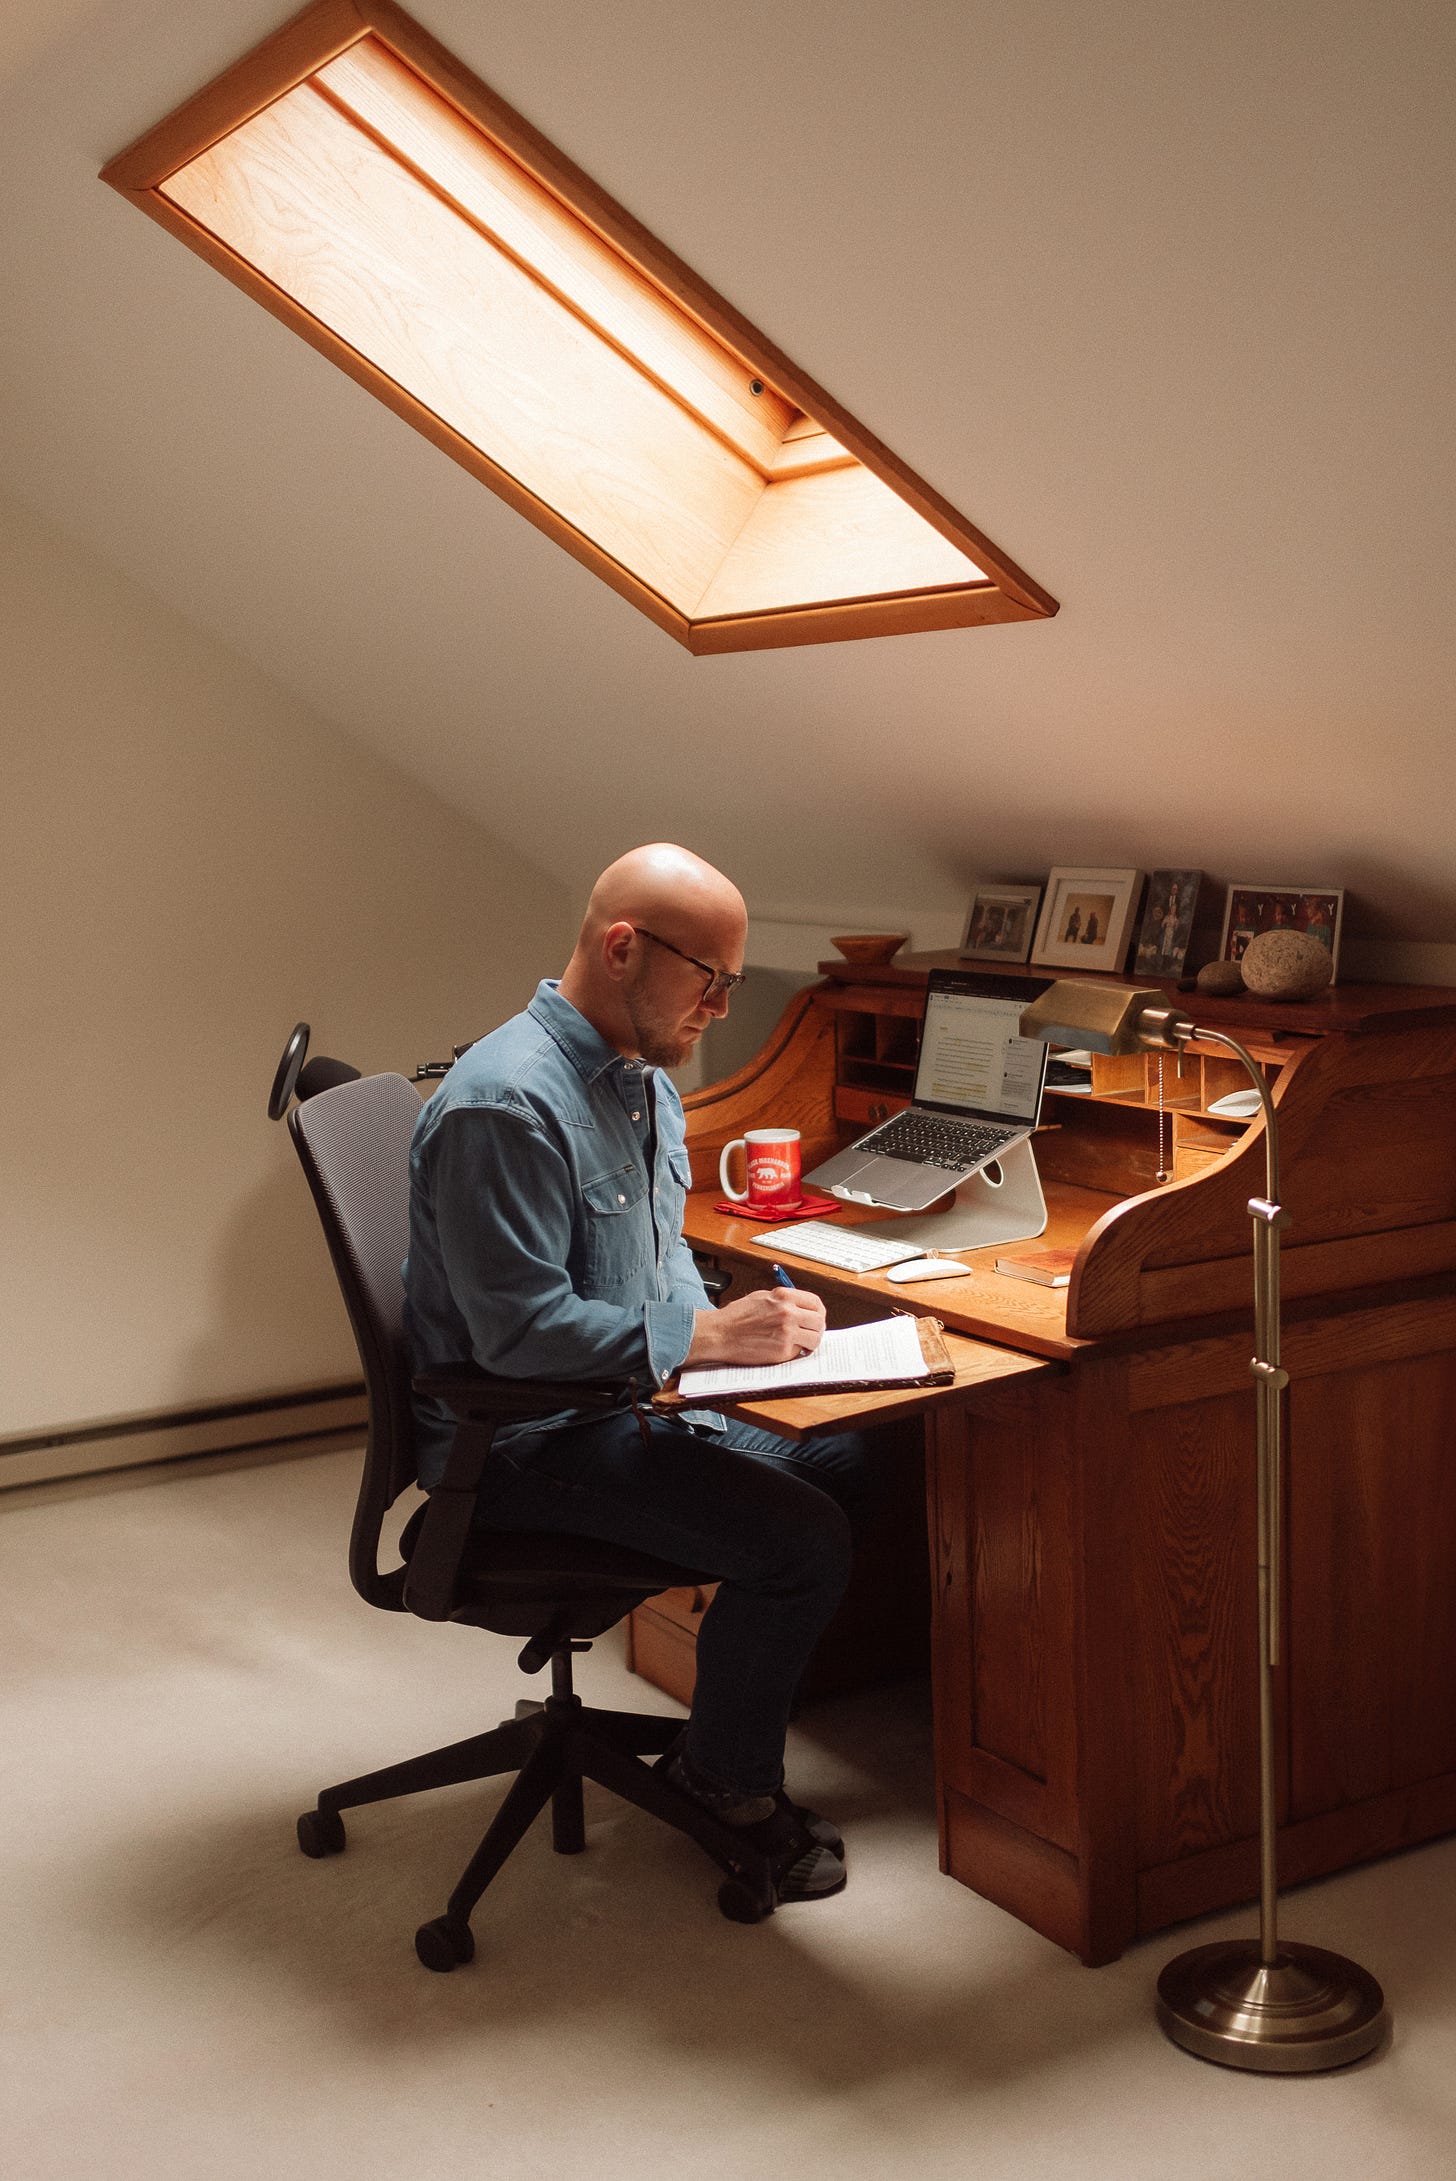 A writing coach sits at a wooden desk in a room with a skylight, working on a laptop with a notebook and pen. Framed photos are placed on the desk.